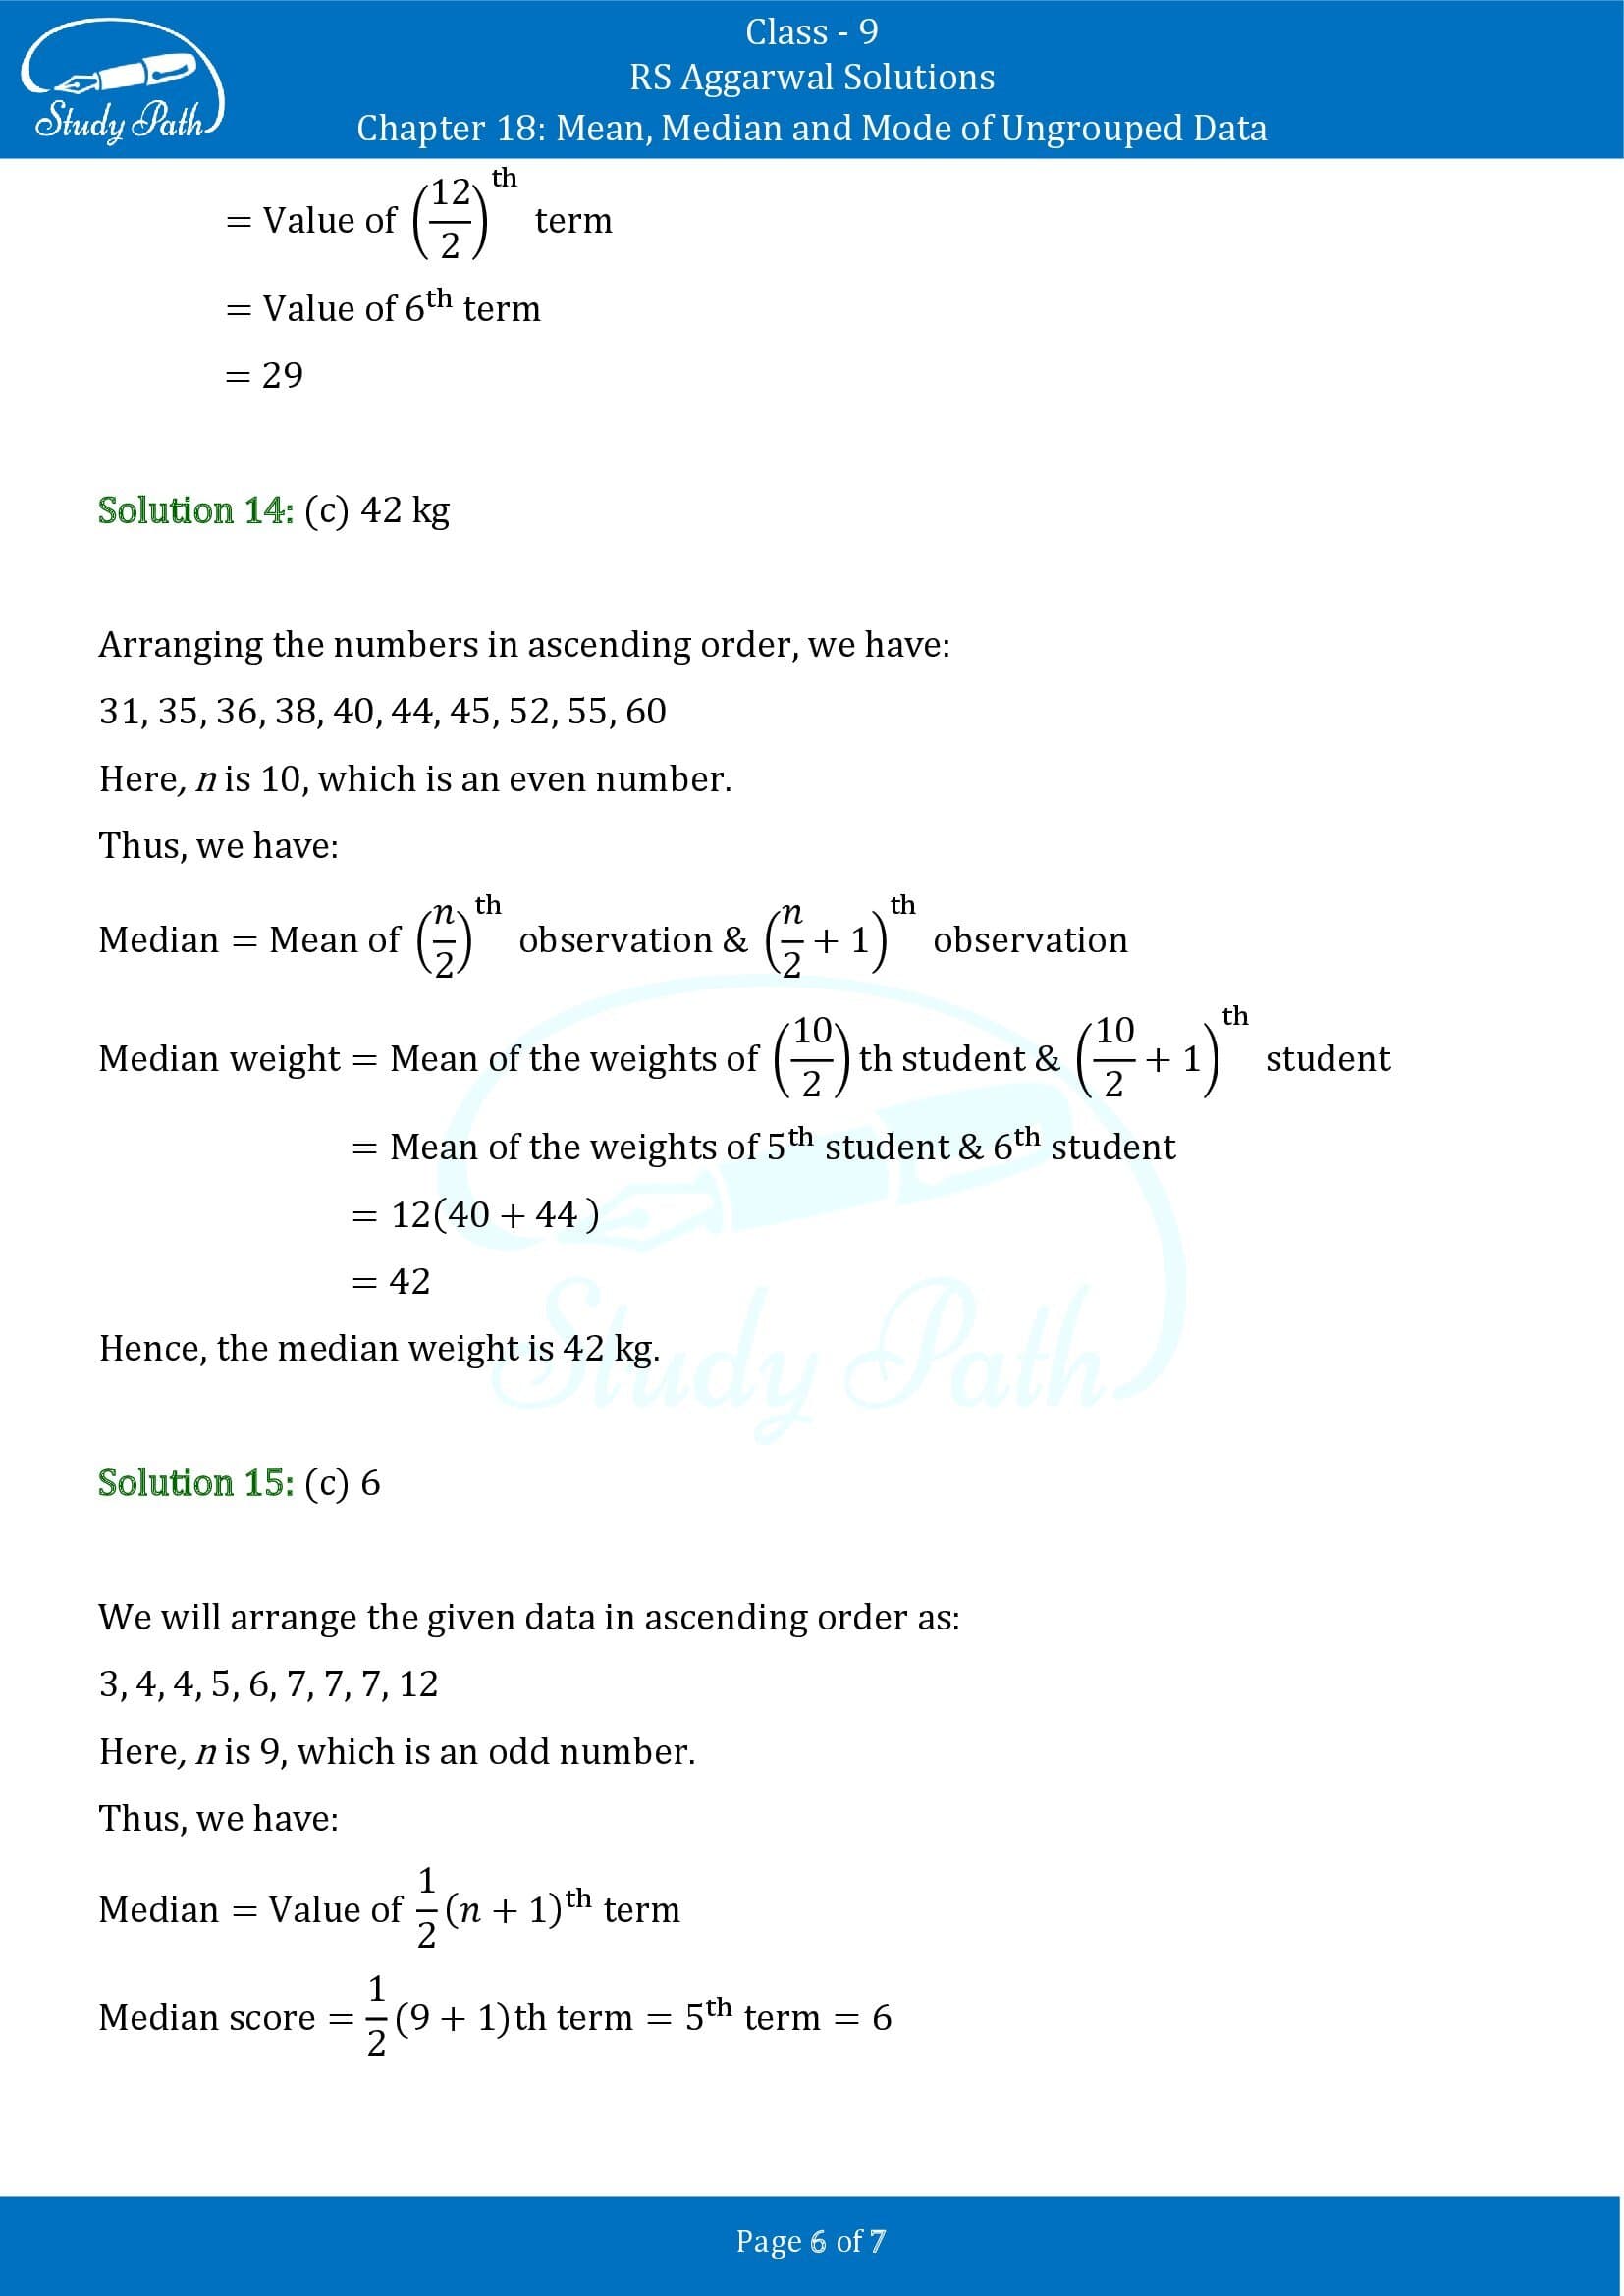 RS Aggarwal Solutions Class 9 Chapter 18 Mean Median and Mode of Ungrouped Data Multiple Choice Questions MCQs 00006